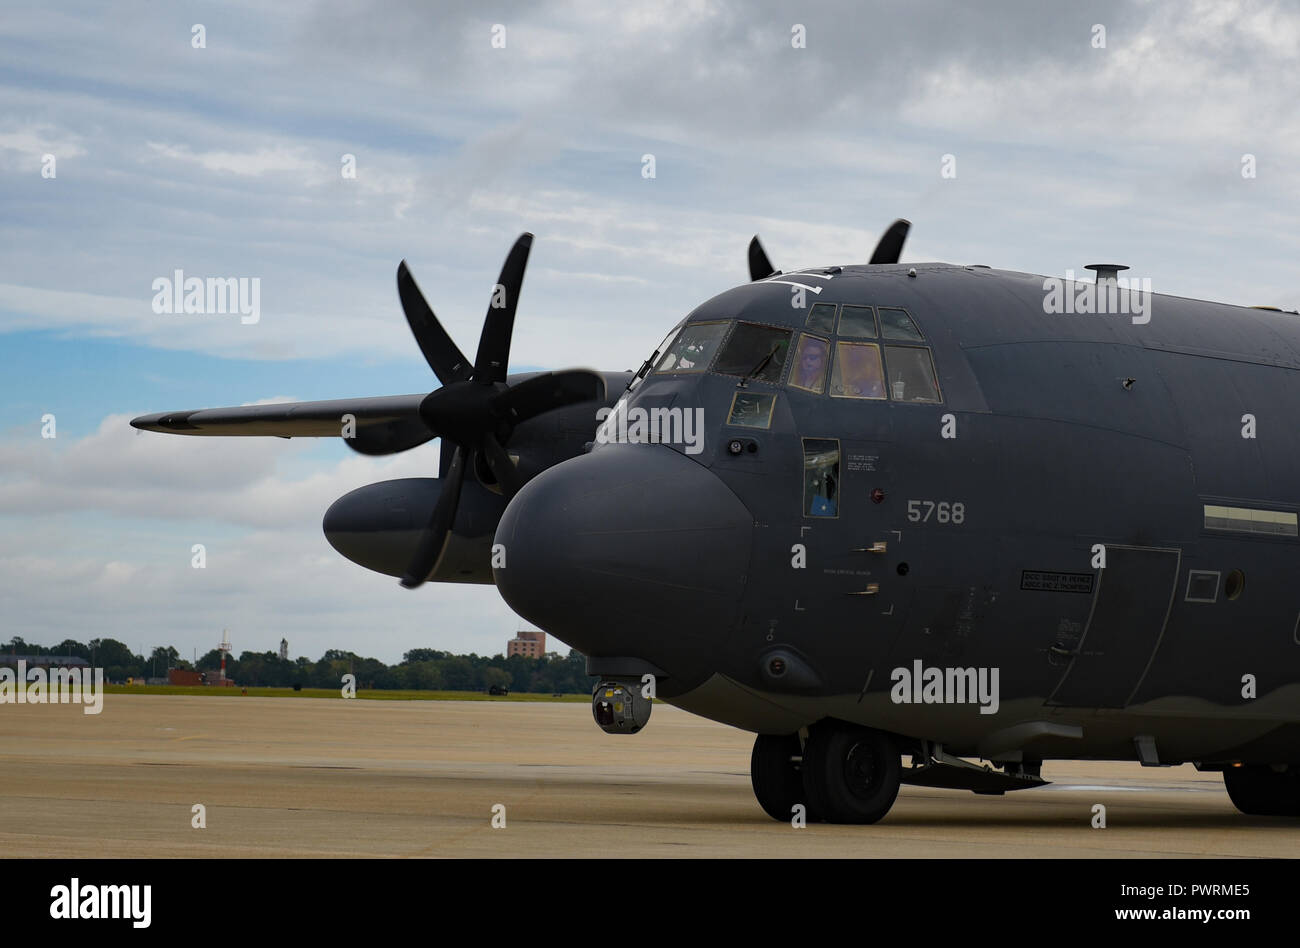 A U.S. Air Force HC-130J Combat King II from the 71st Rescue Squadron prepares to taxi at Joint Base Langley-Eustis, Virginia, Oct. 17, 2018. The 71st RQS is supporting Tyndall Air Force Base, Florida, recovery efforts. (U.S. Air Force photo by Staff Sgt. Carlin Leslie/Released) Stock Photo